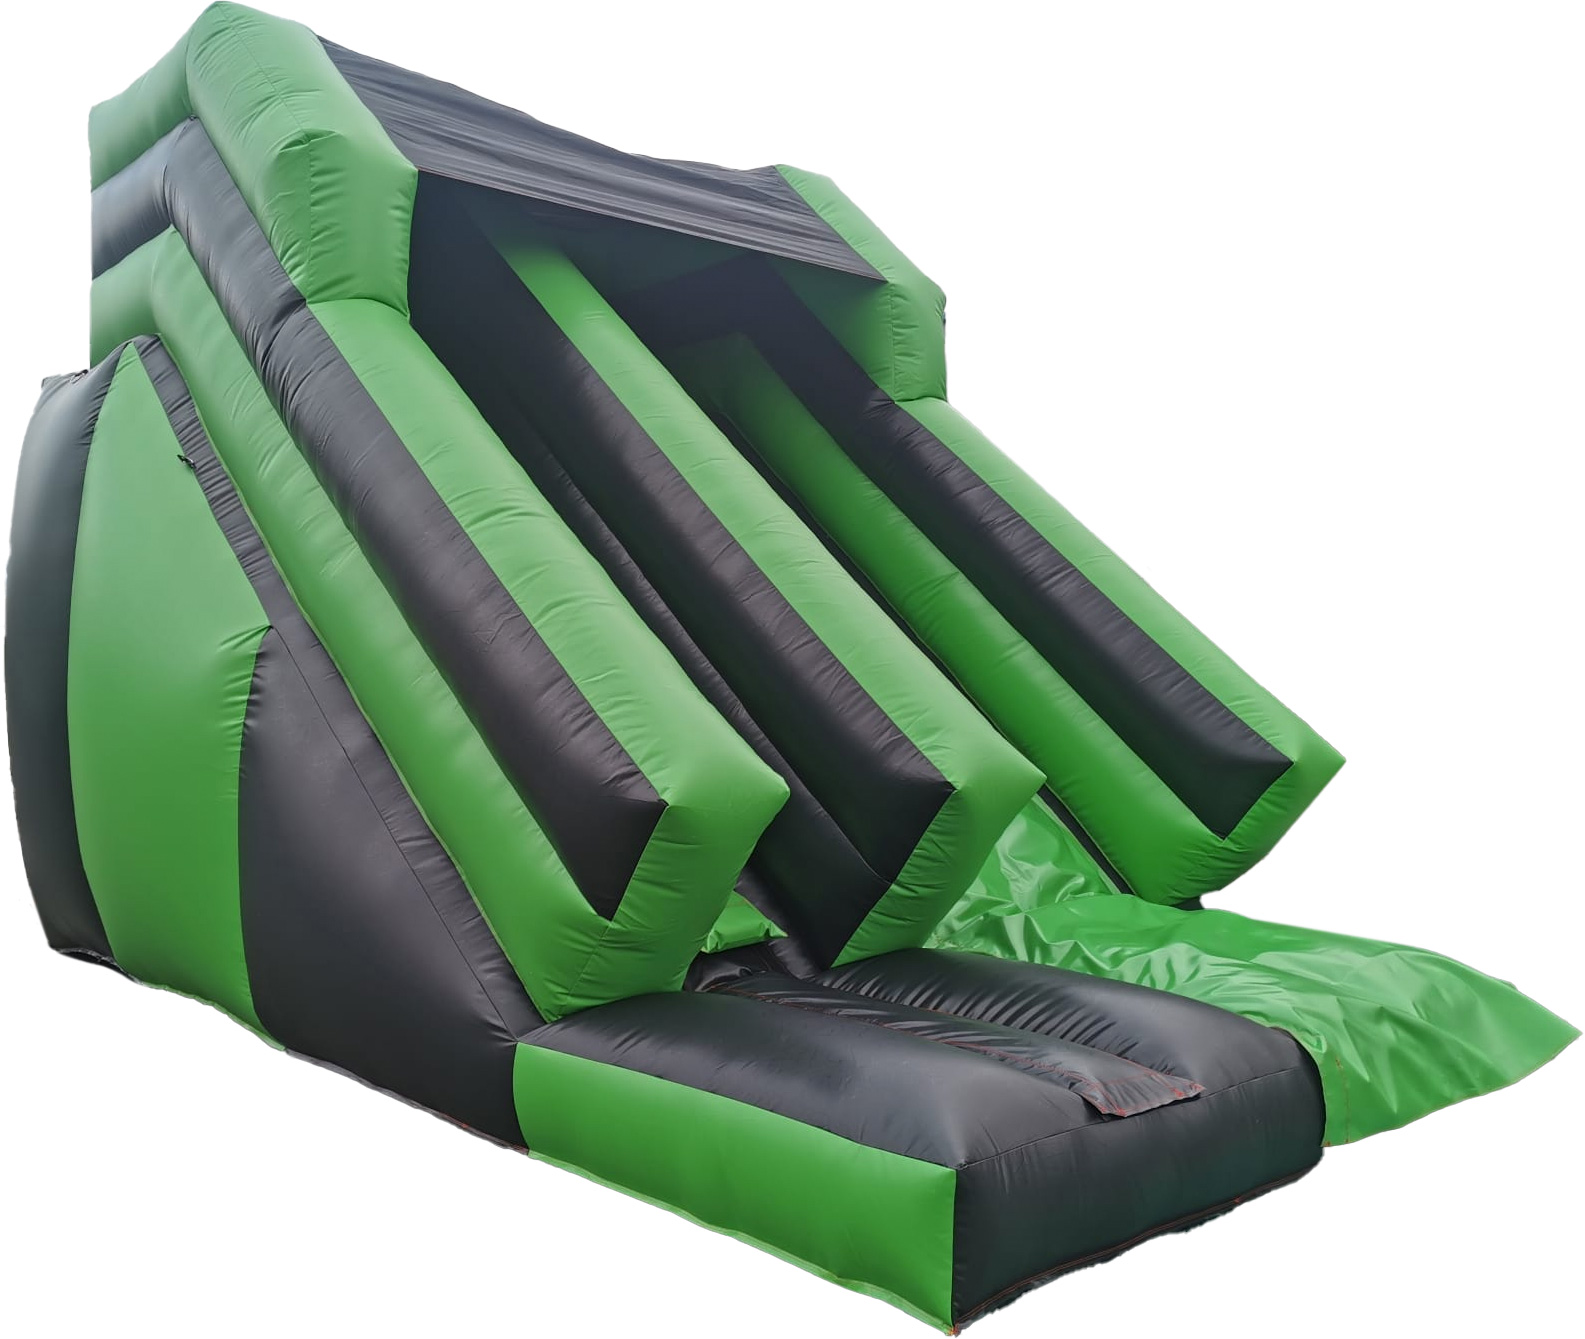 Bouncy Castle Sales - BS46 - Bouncy Inflatable for sale